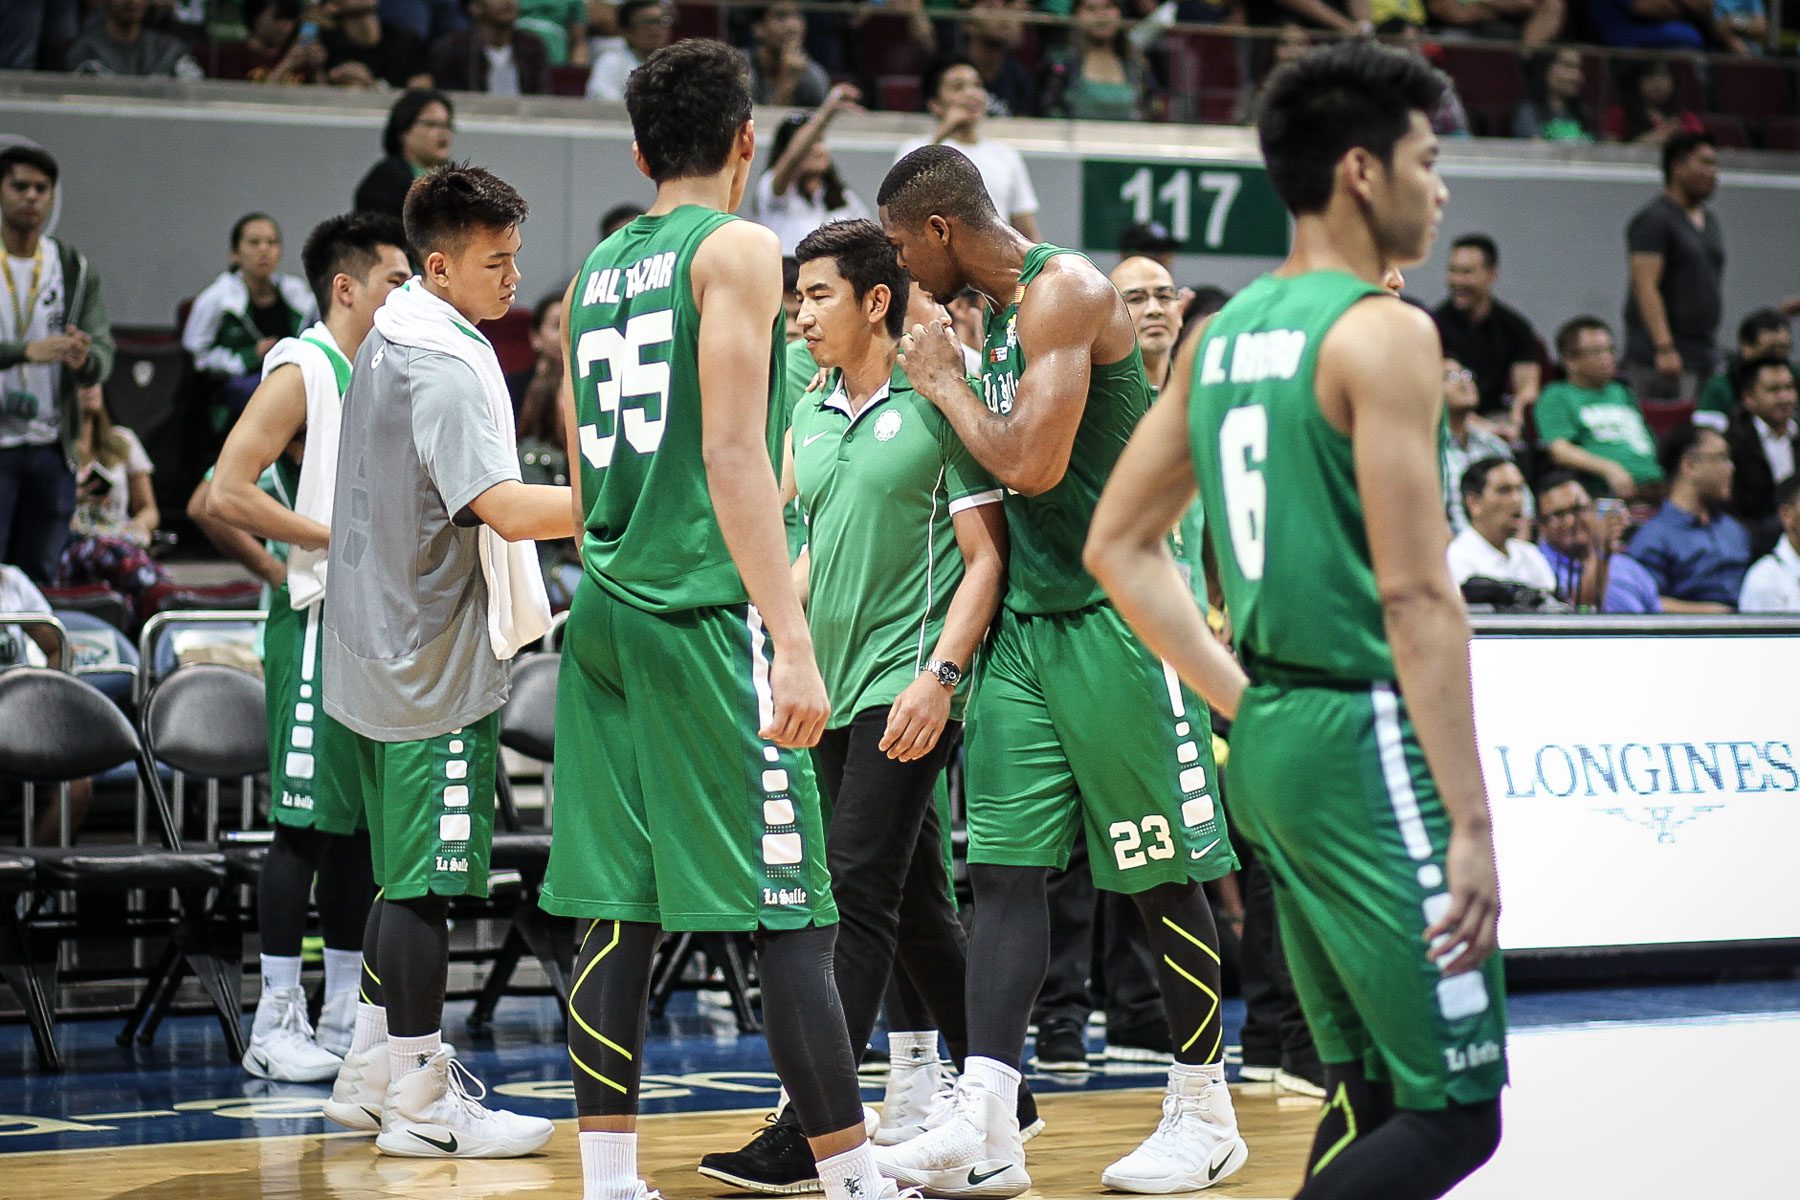 La Salle coach Ayo silent on ejection, possible suspension